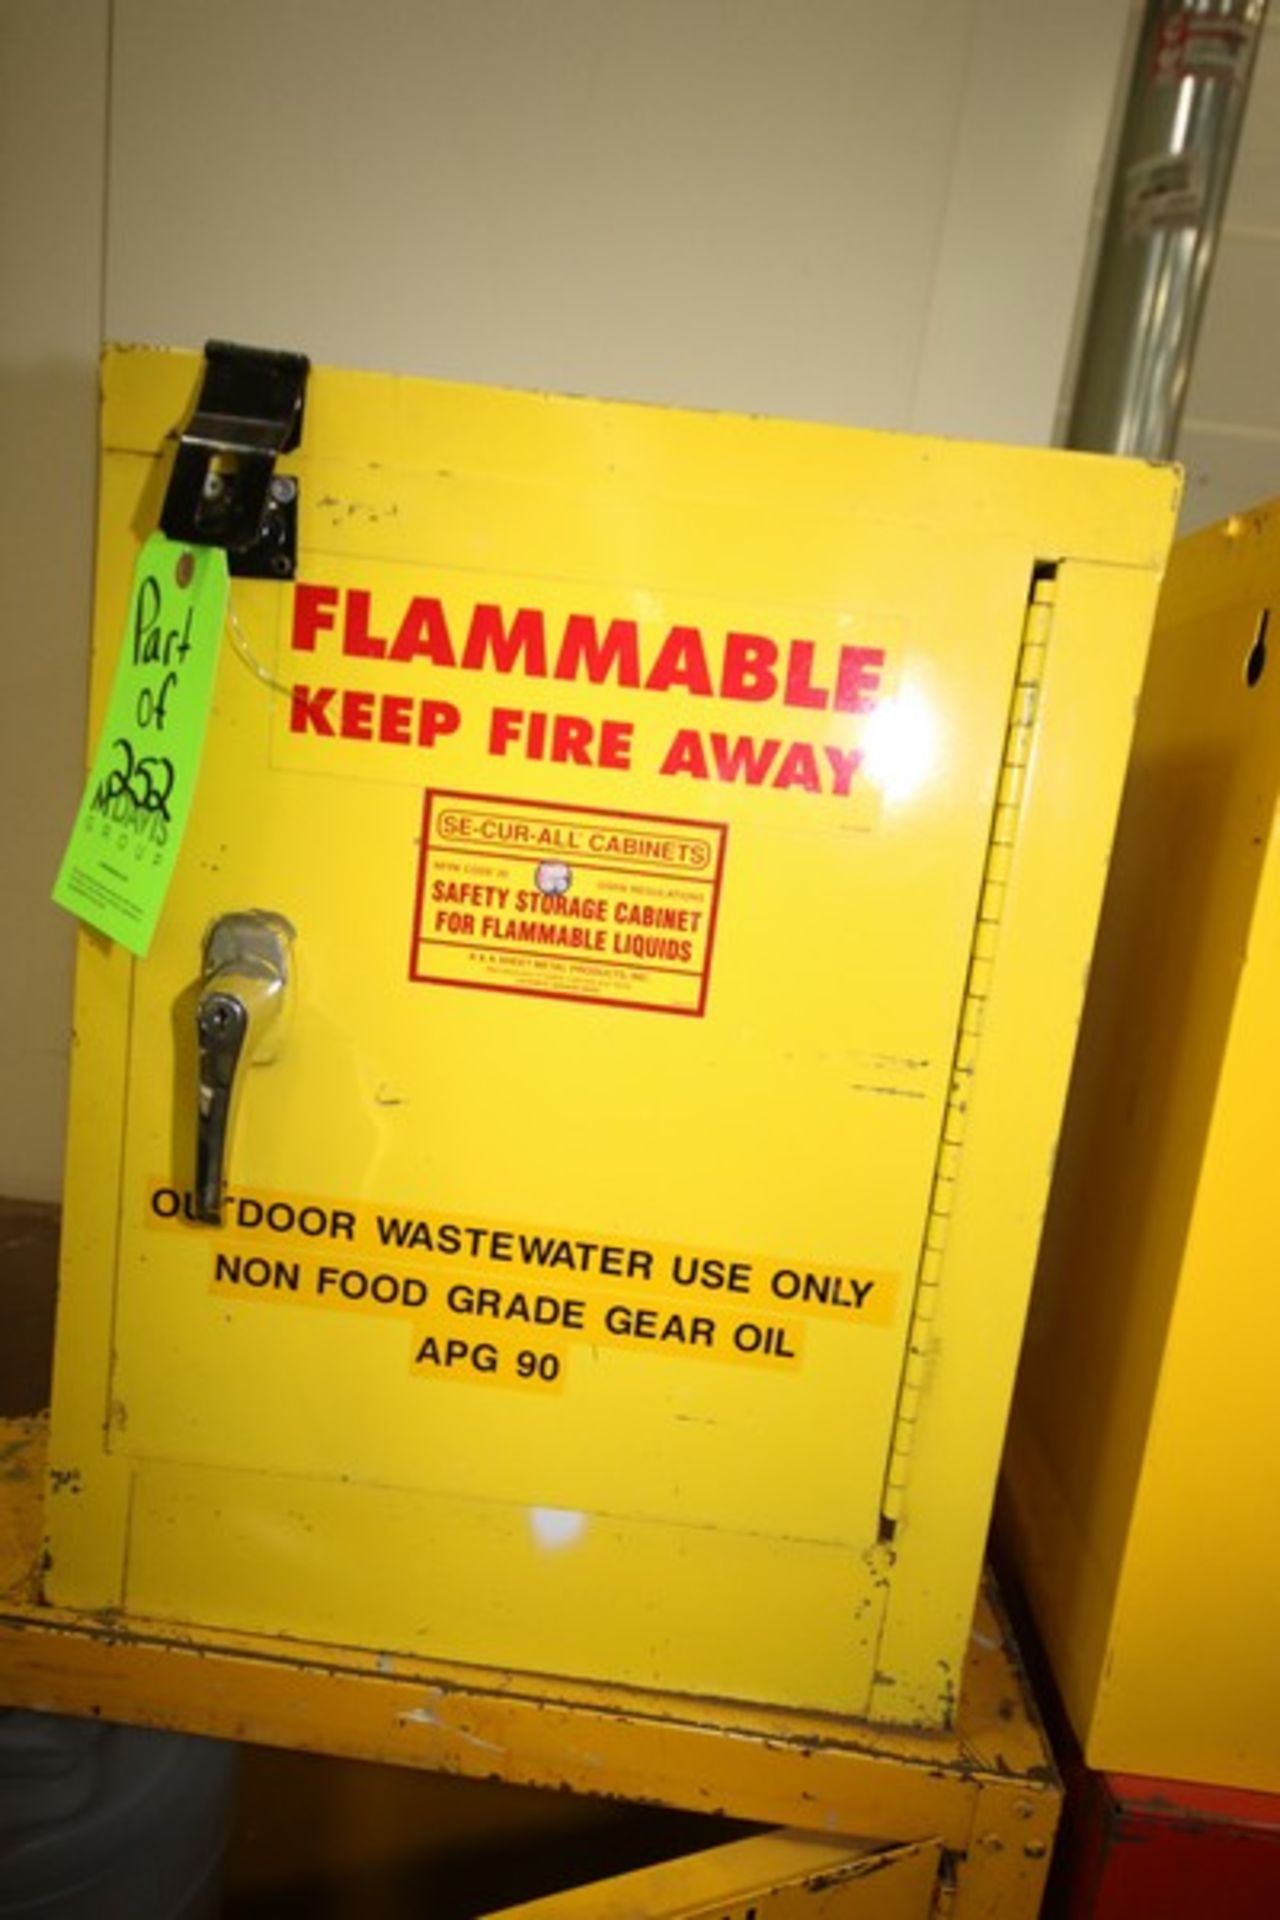 JustRite 4 Gal. Flammable Storage Cabinets - Image 2 of 2